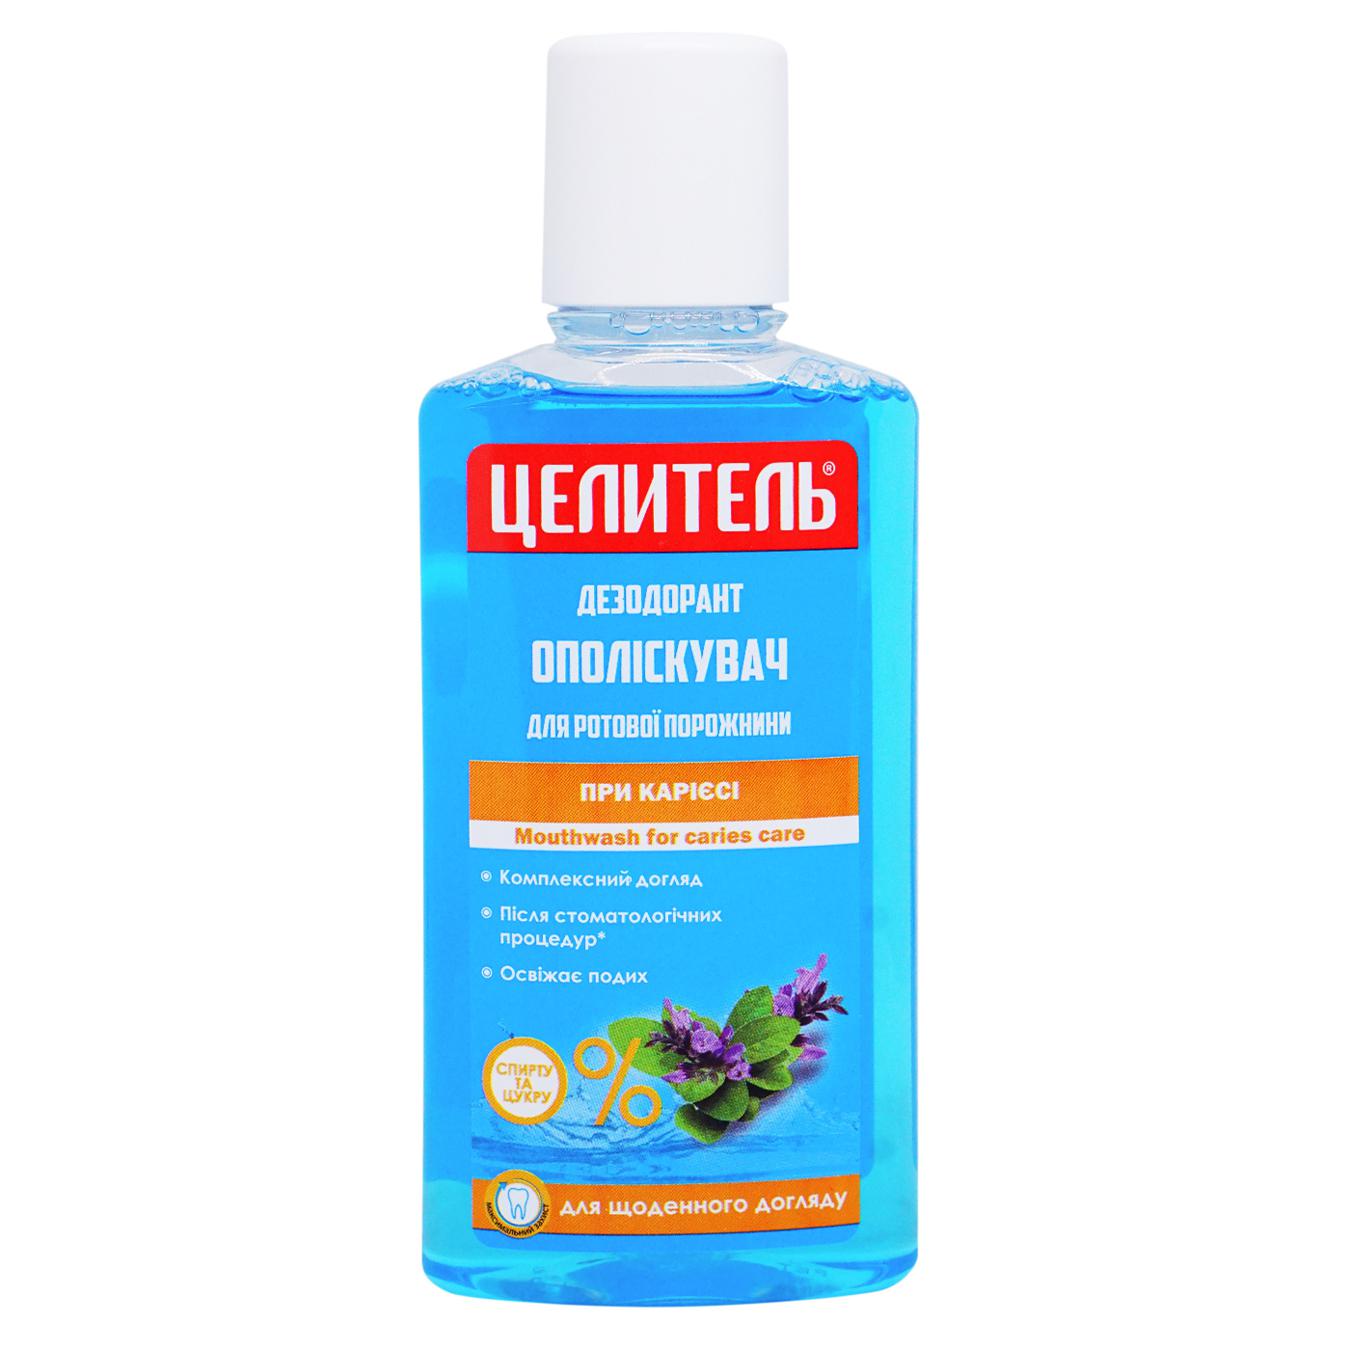 Deodorant-rinse mouth healer for caries prevention 250ml